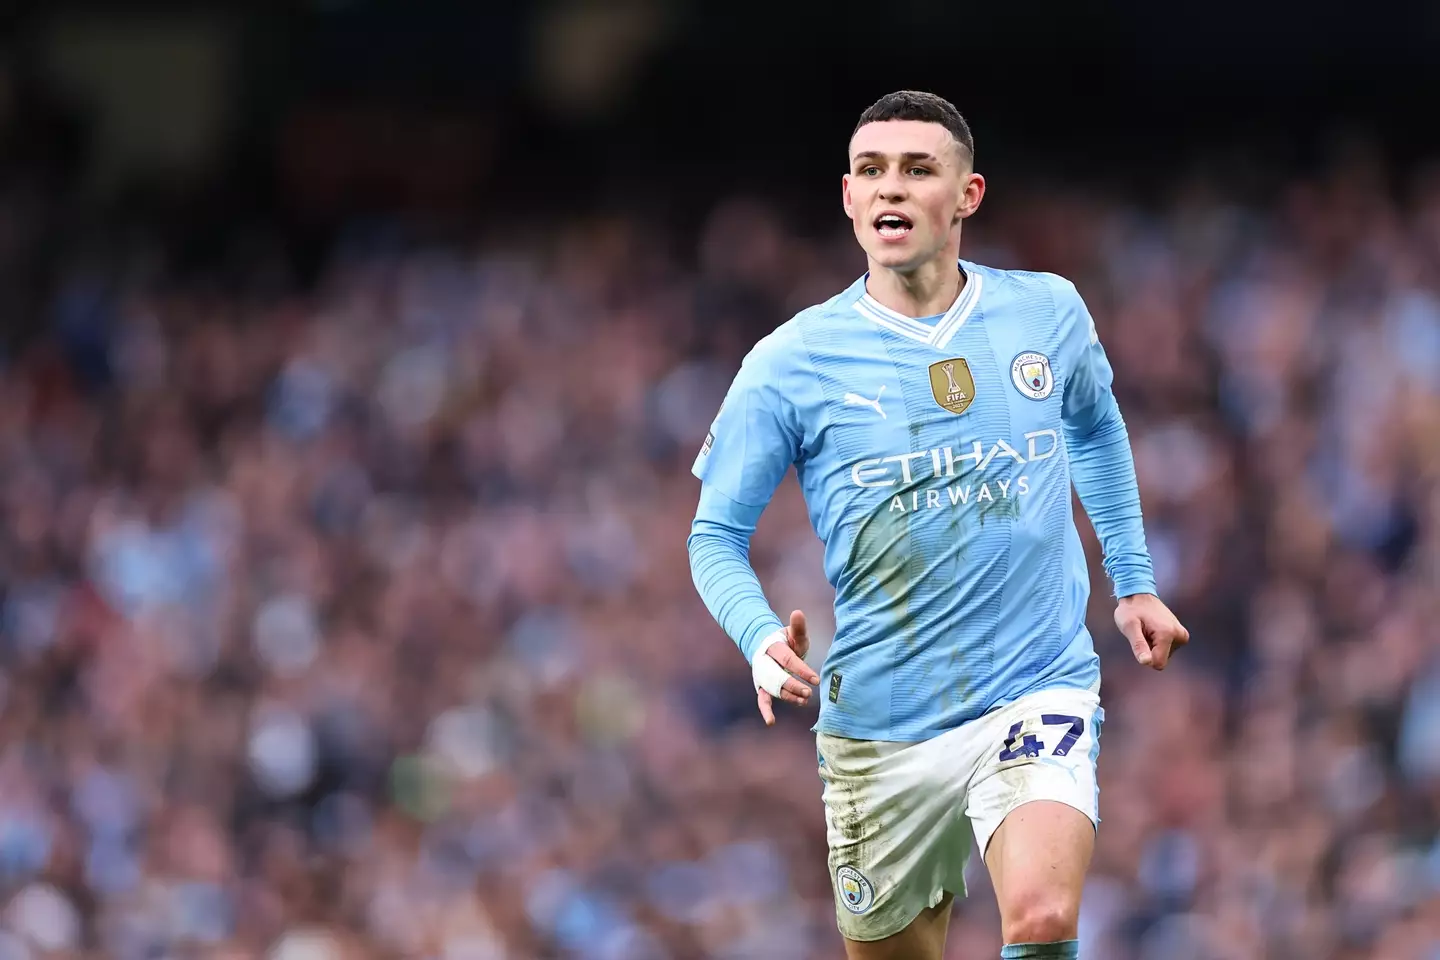 Foden scored has enjoyed a superb season with Man City (Getty)